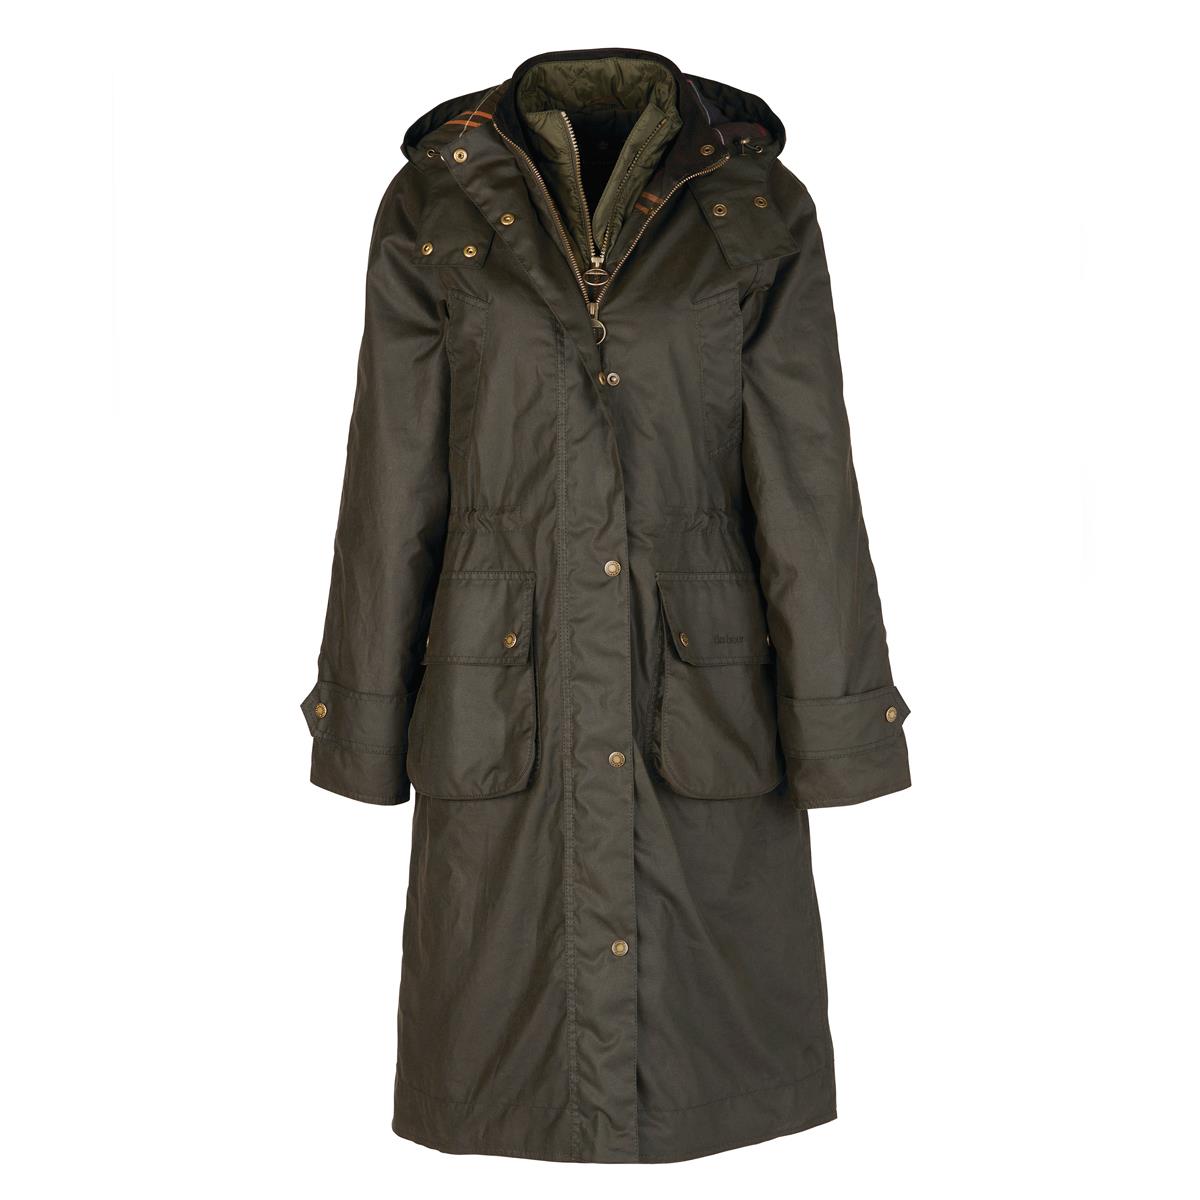 What is the best way to clean the Long Cannich Wax on the Barbour Cannich Wax Jacket?